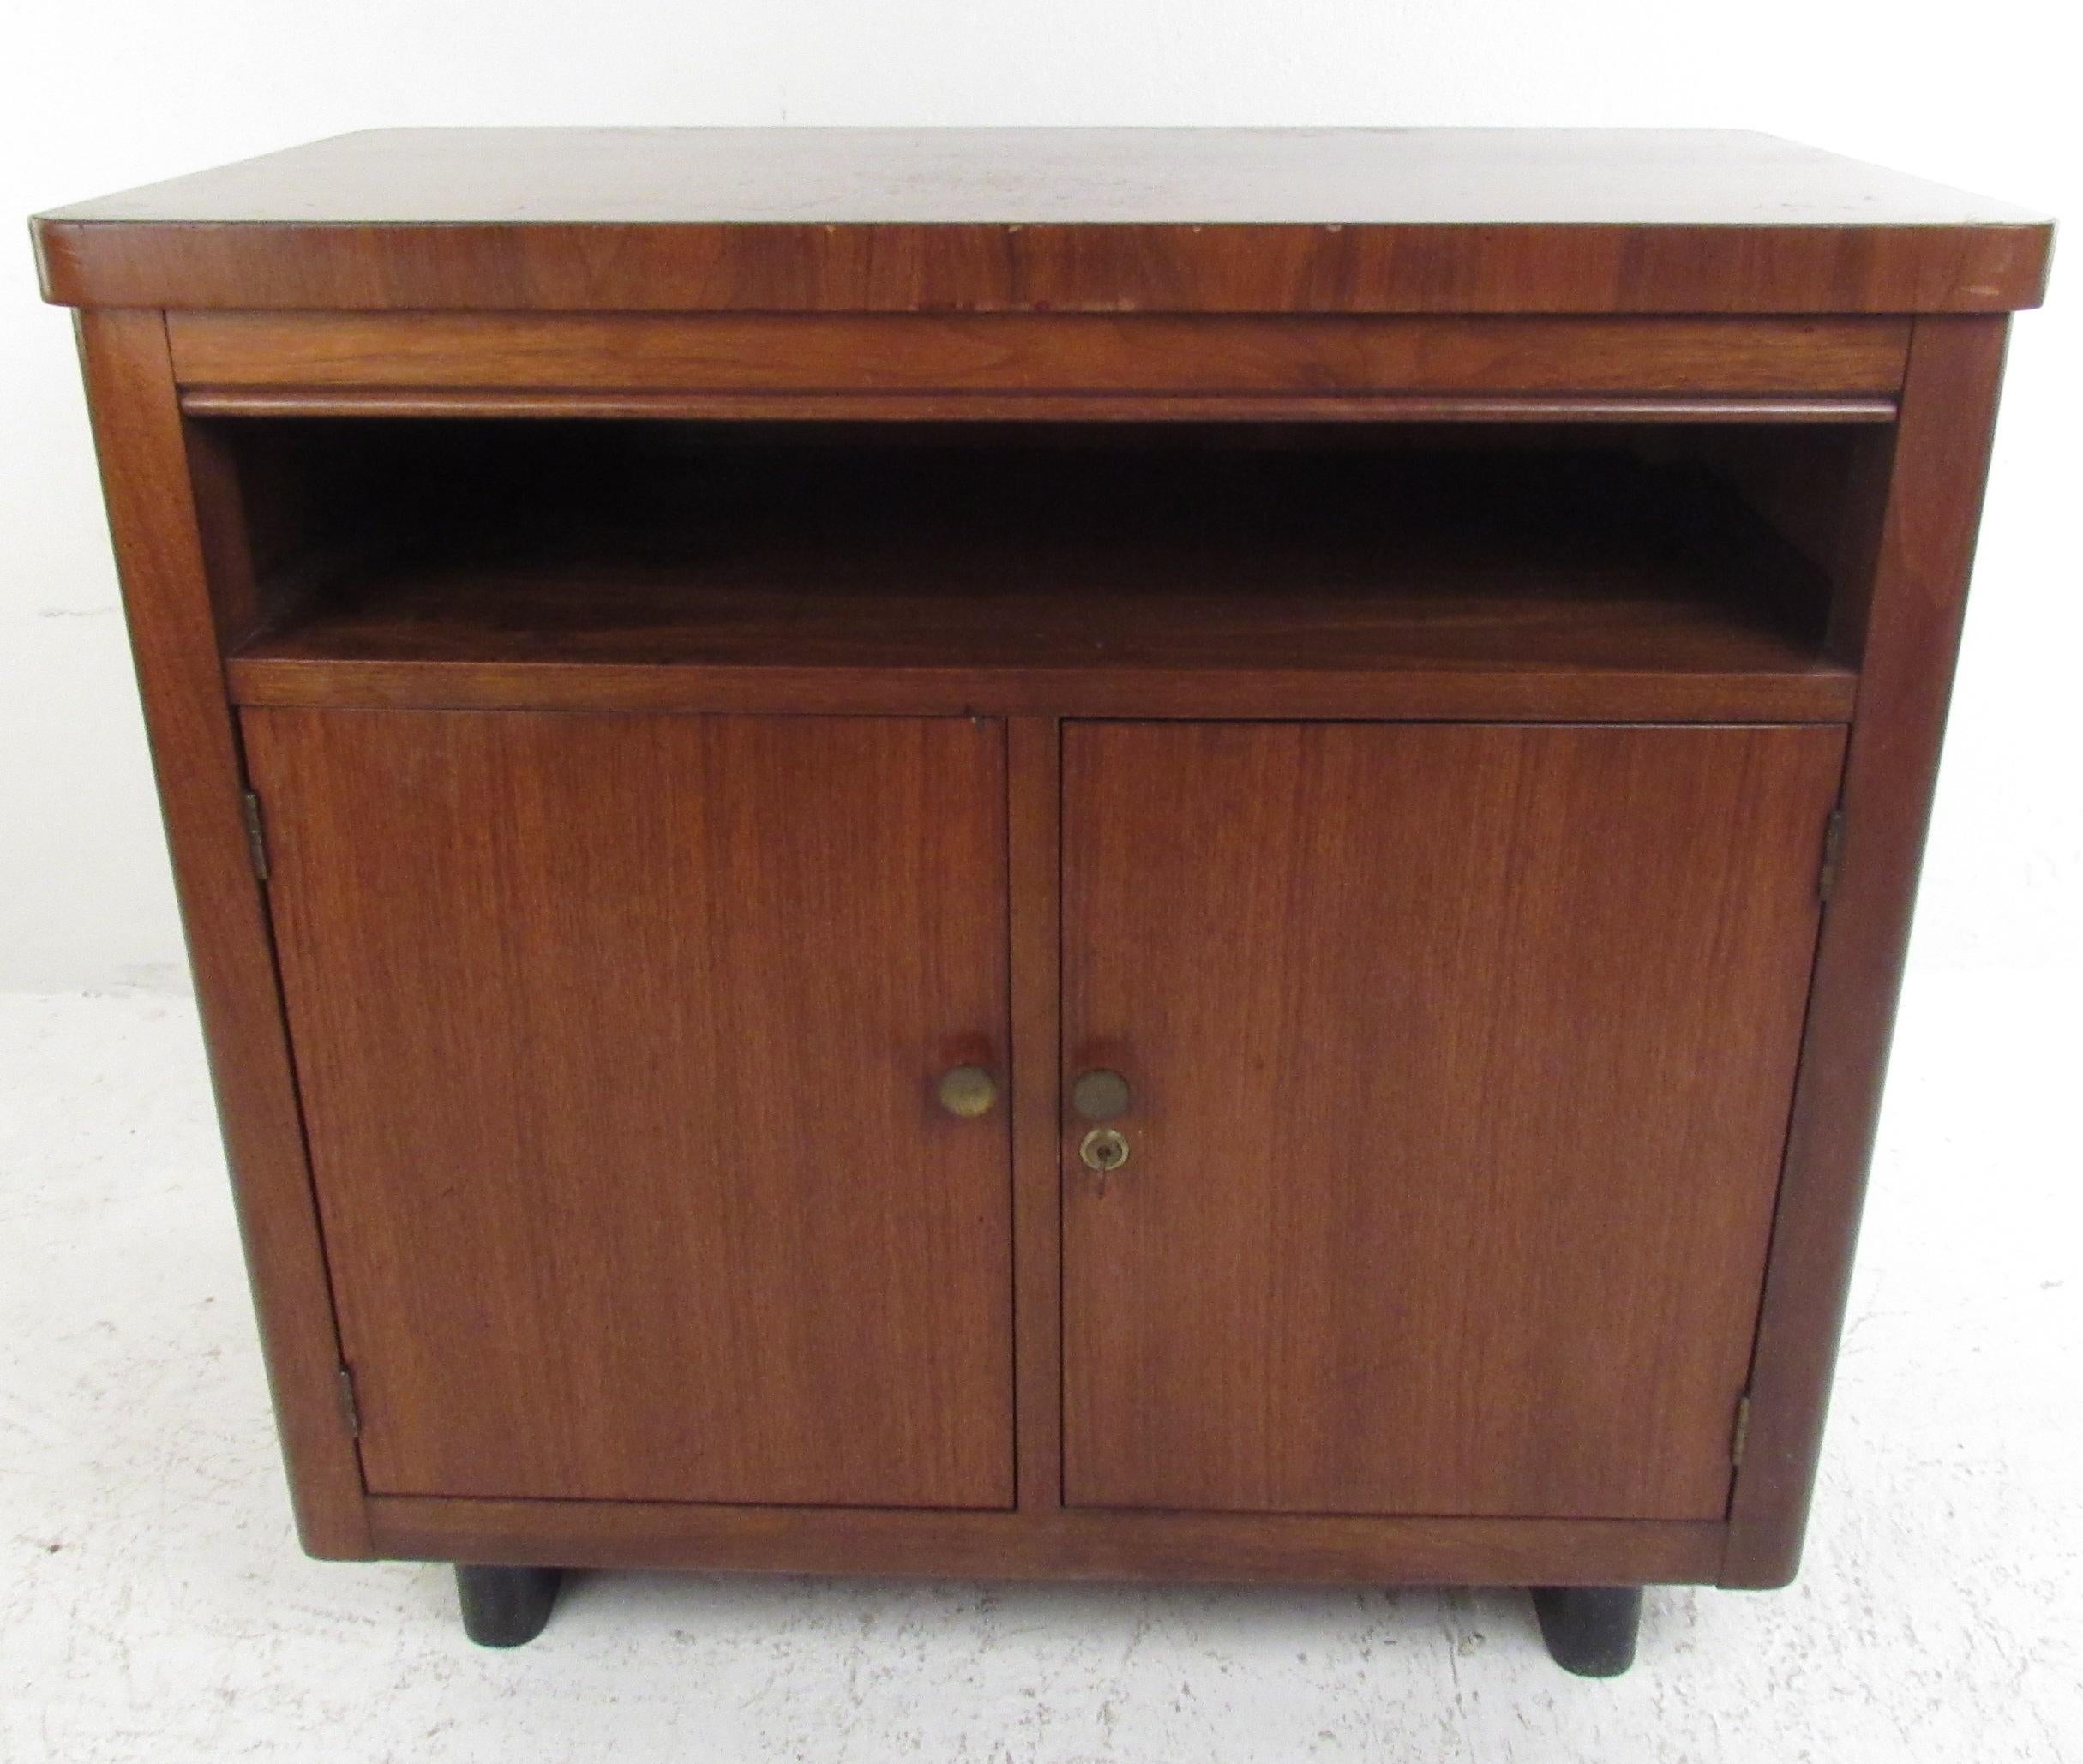 A Mid-Century Modern walnut cabinet boasting ample storage and sleek design. Perfect for any home/office setting. Please confirm pickup location (NY/NJ).